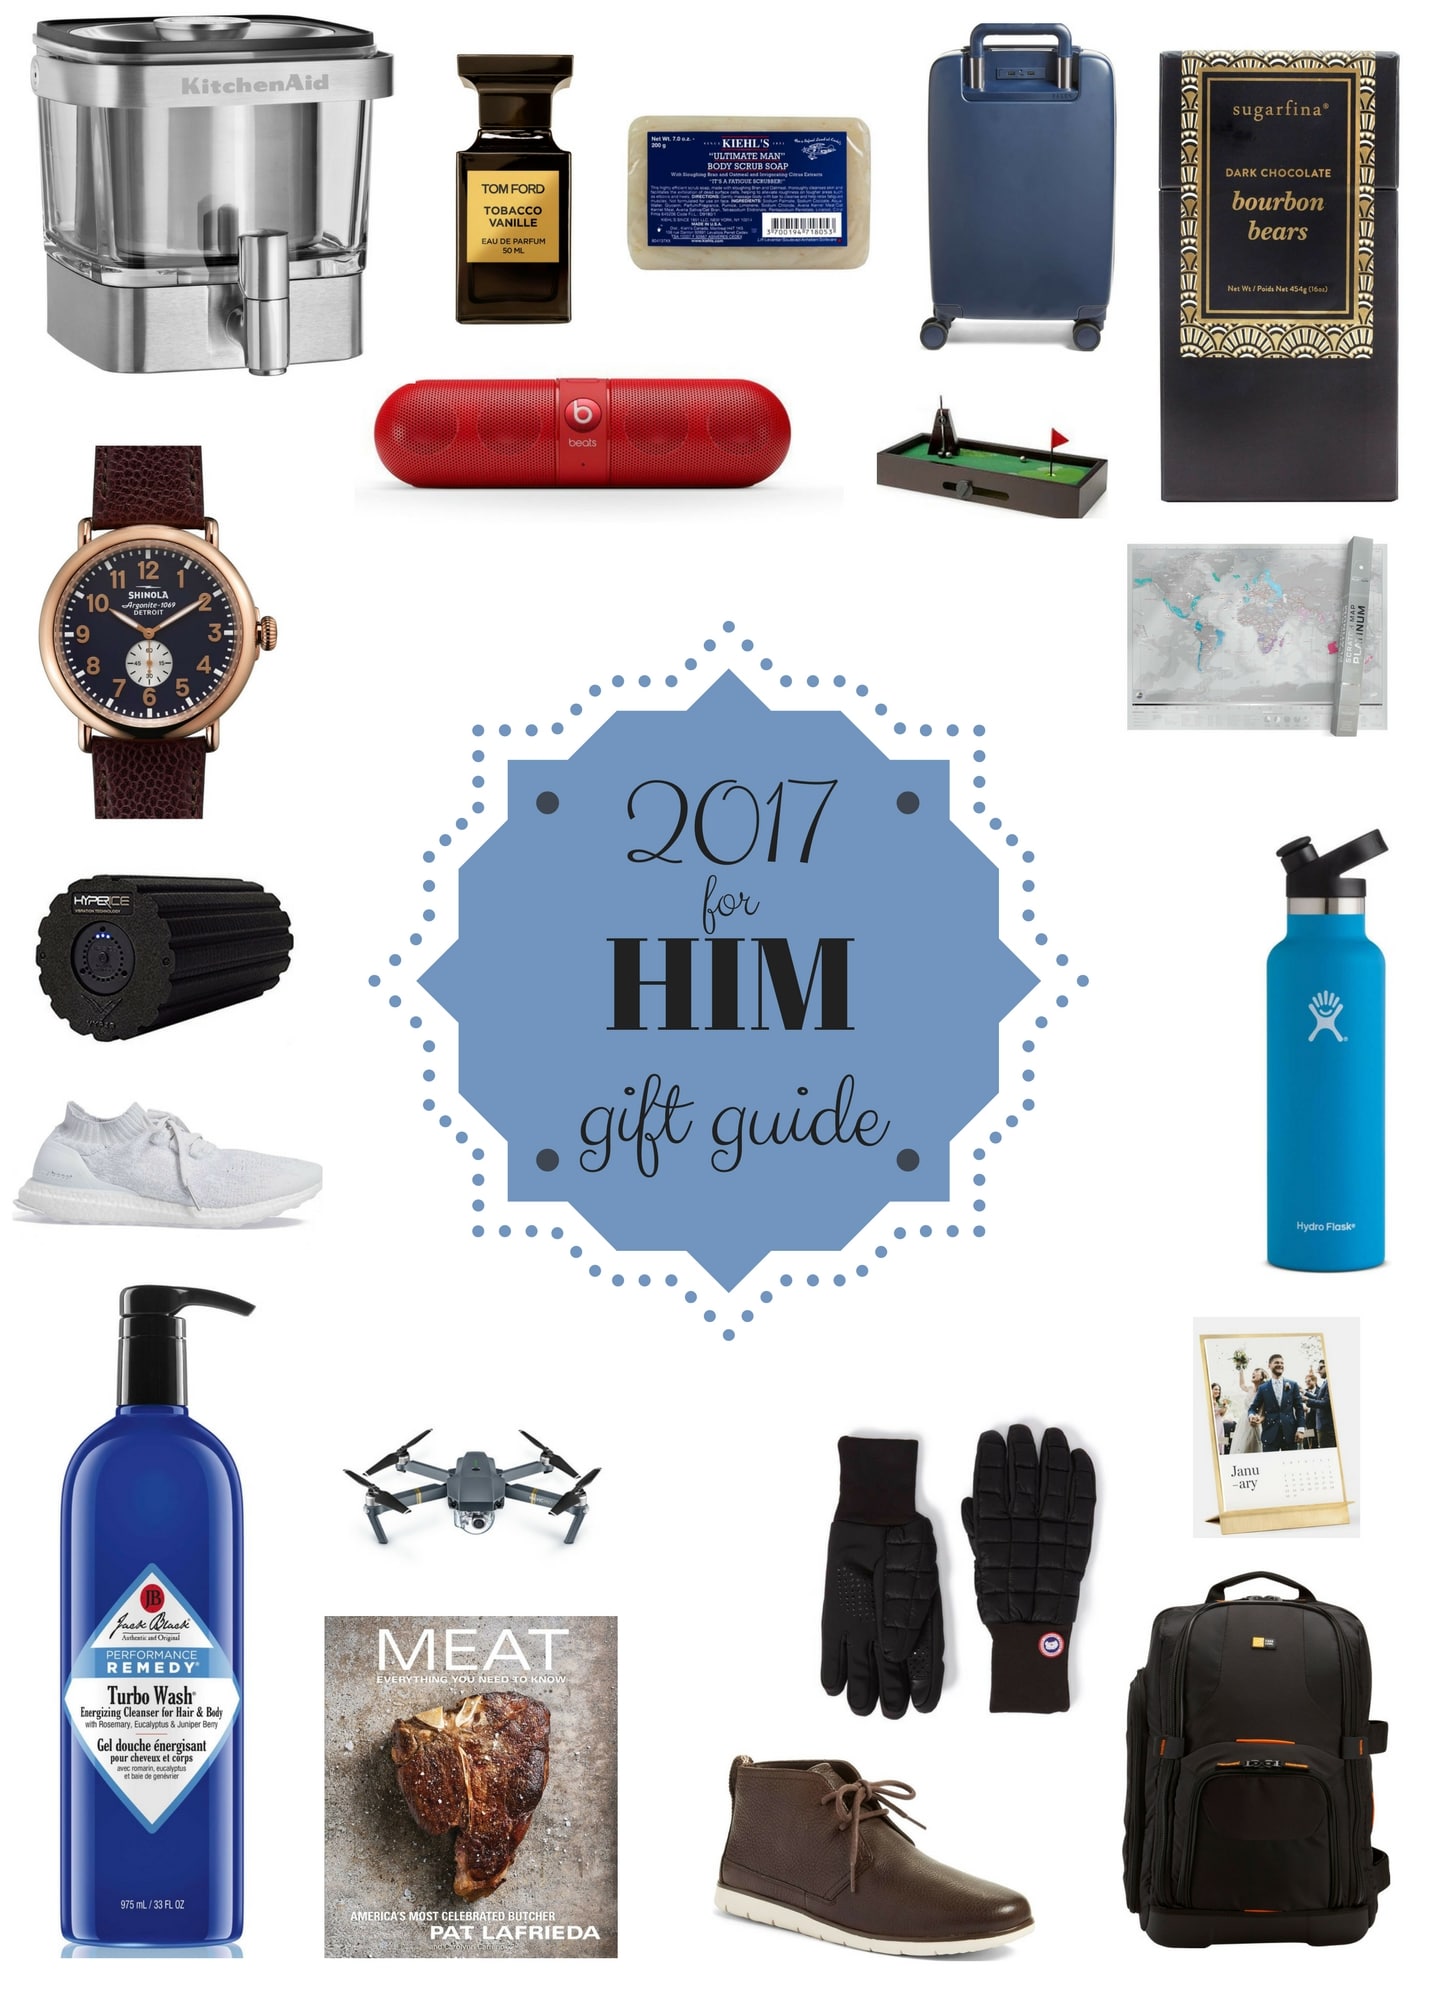 2017 holiday gift guide for him I howsweeteats.com #giftguide #holiday #christmas